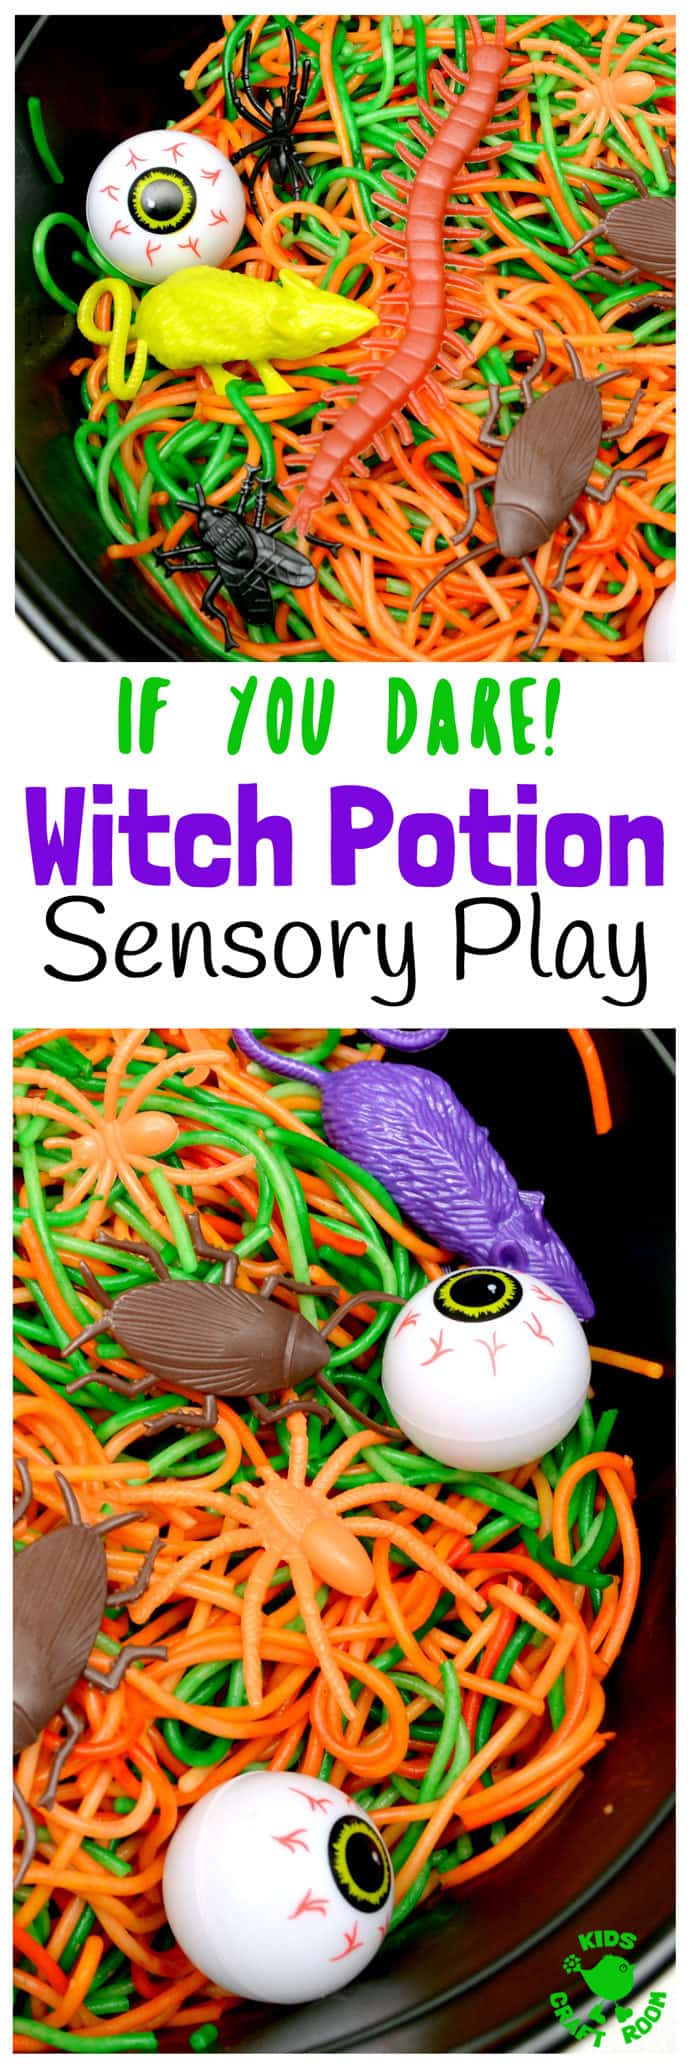 WITCH'S POTION HALLOWEEN SENSORY PLAY IDEA - Have you got a little witch or wizard with a love for the YUK? Kids will be spellbound getting hands on with this fun Witch's Potion Halloween Sensory Play Activity!